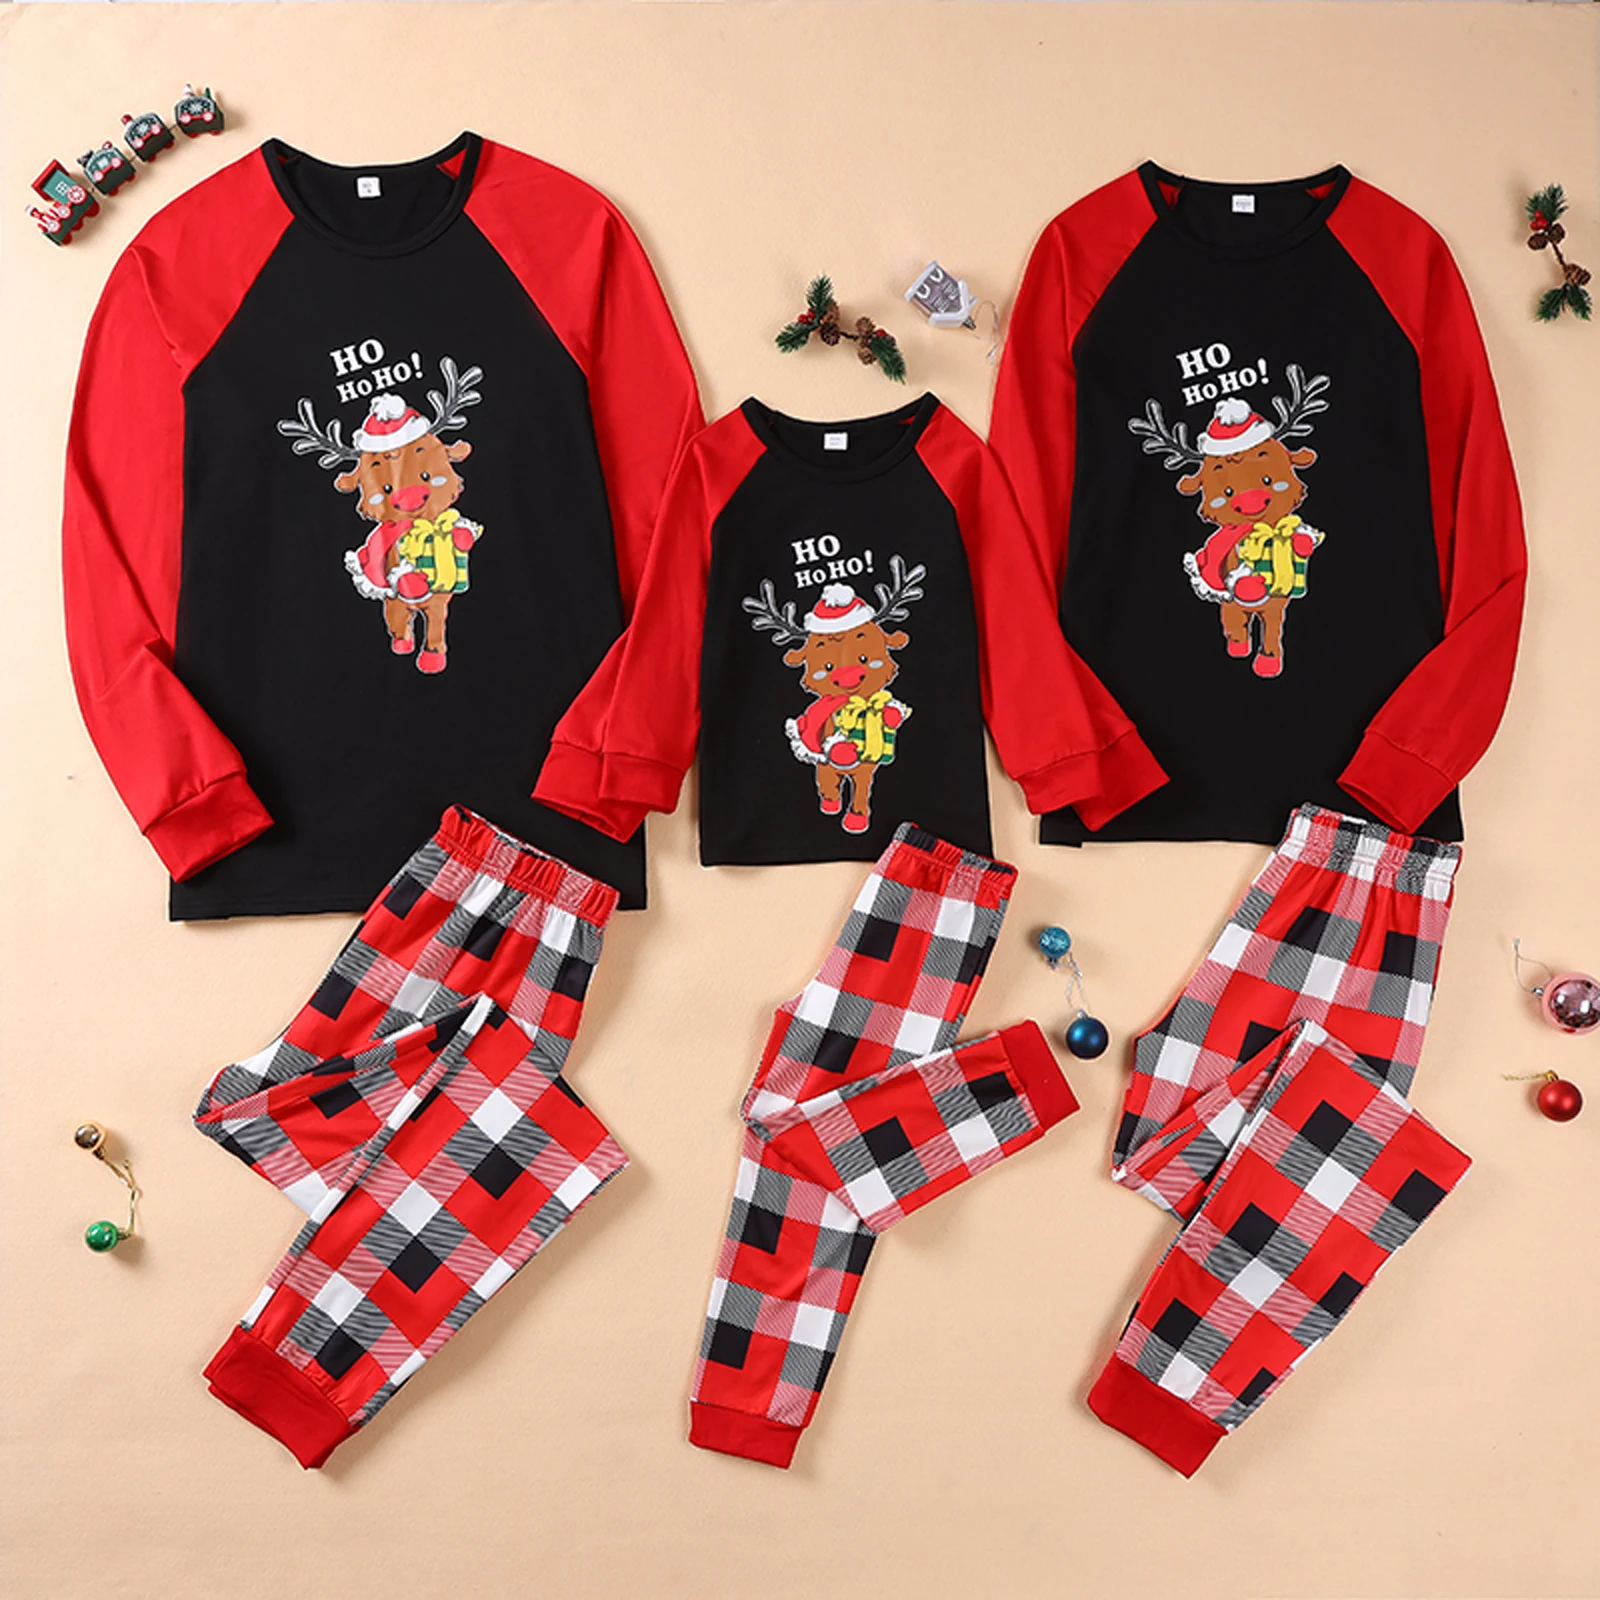 Winter 2022 New Year Couples Christmas Pajamas Mother Kids Clothes Tops+Pants Christmas Pajamas For Family Clothing Set images - 6